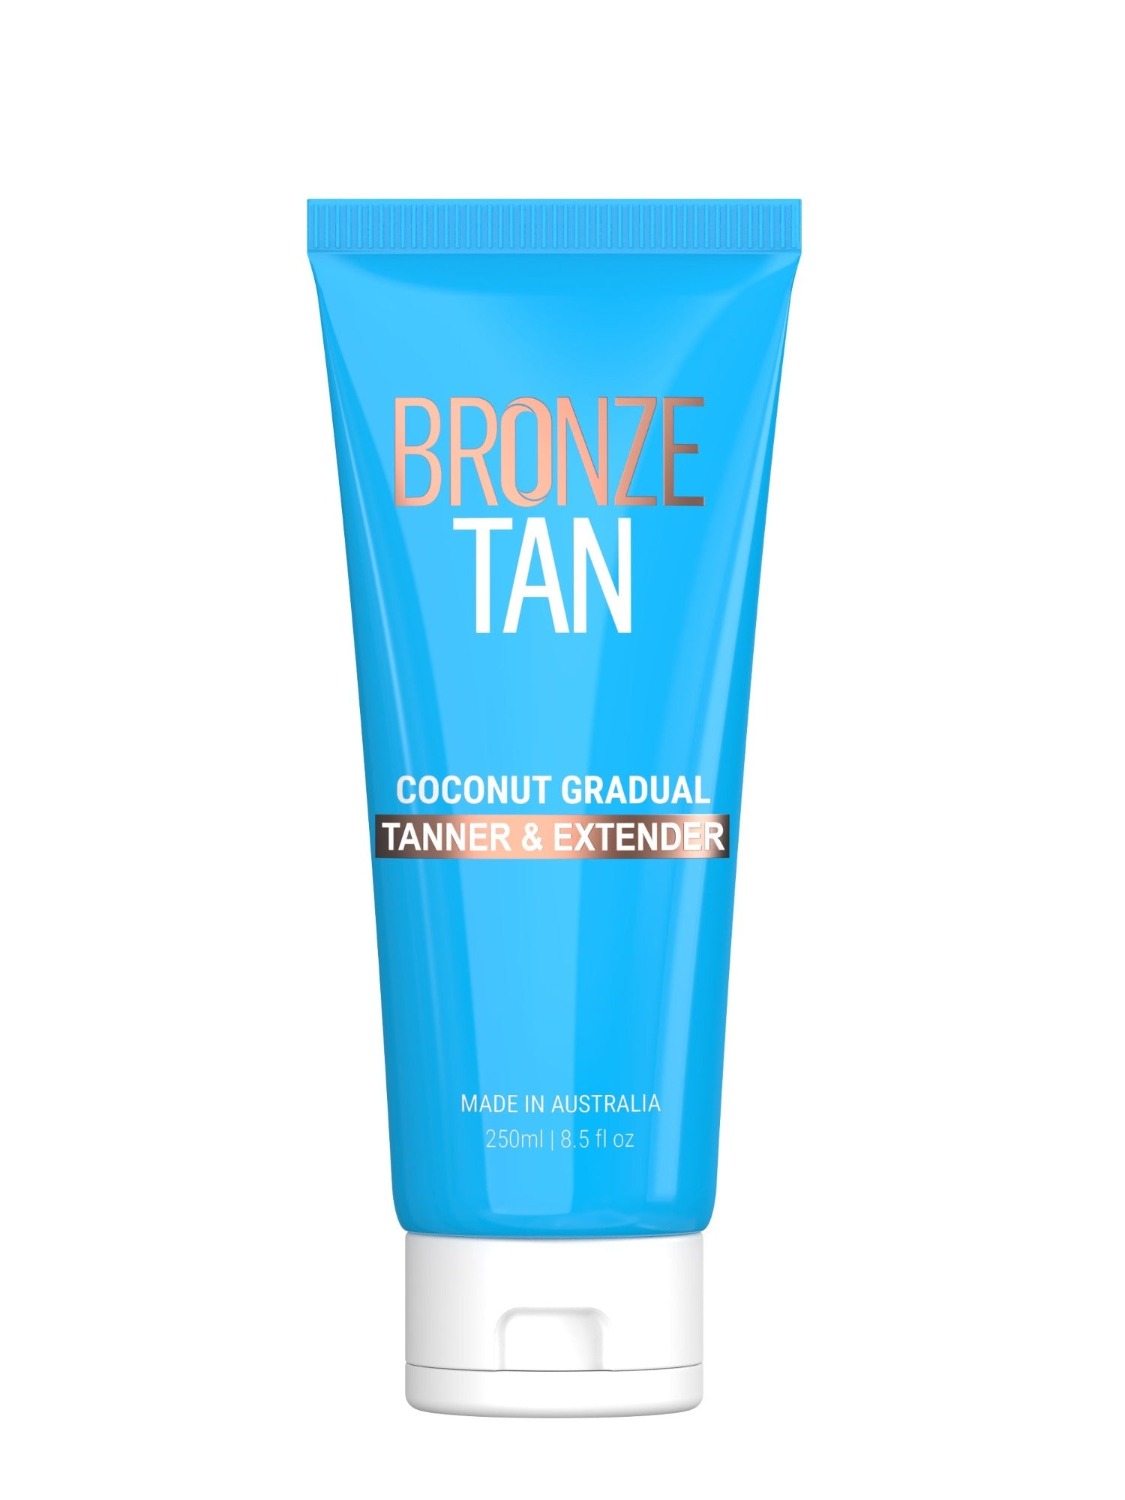 Coconut Gradual Self Tan Extender Lotion | Bronze Tan | Self Tanning Products | Self Tanner | Sunless Tanning